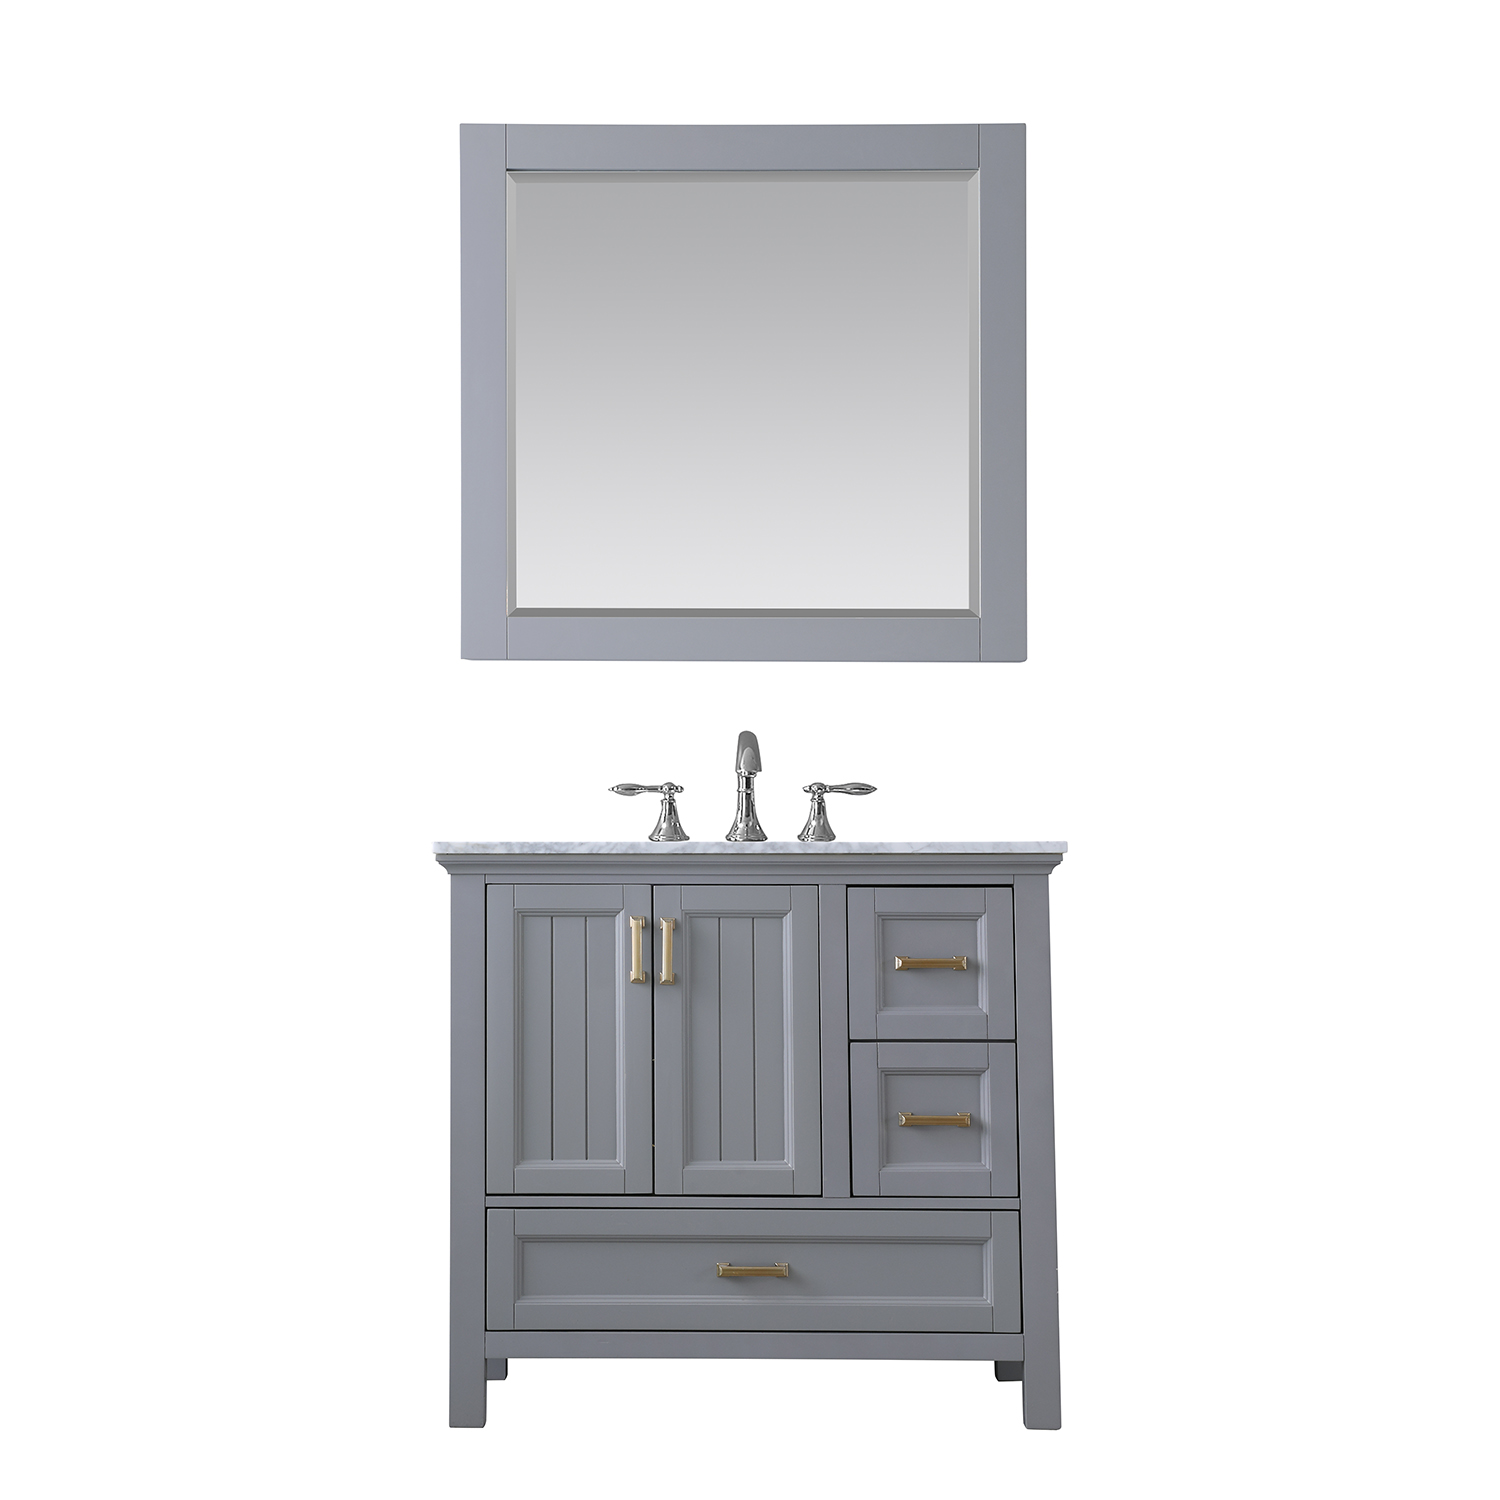 Issac Edwards Collection 36" Single Bathroom Vanity Set in Gray and Carrara White Marble Countertop without Mirror 